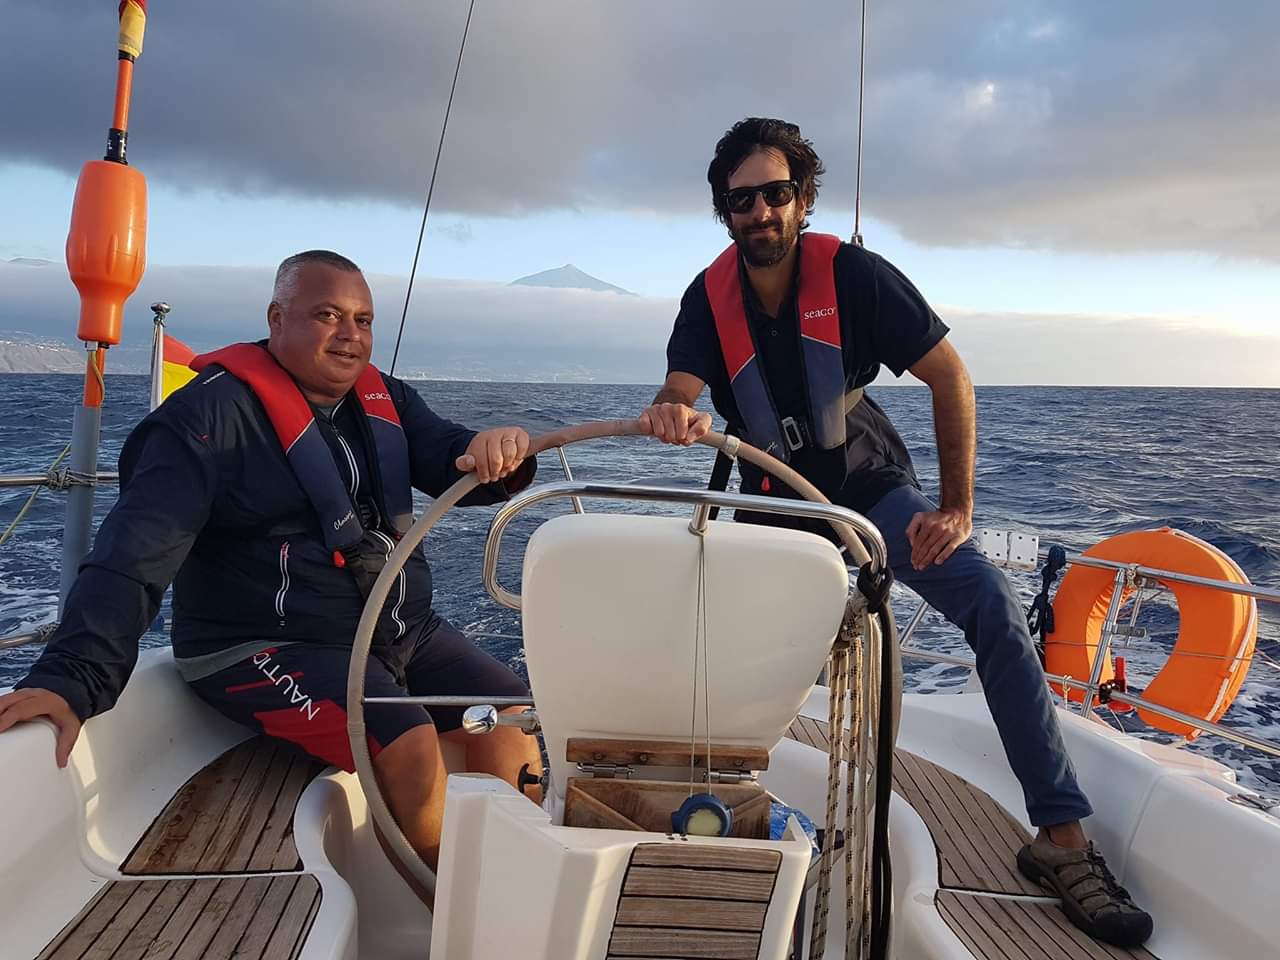 yachtmaster offshore certificate